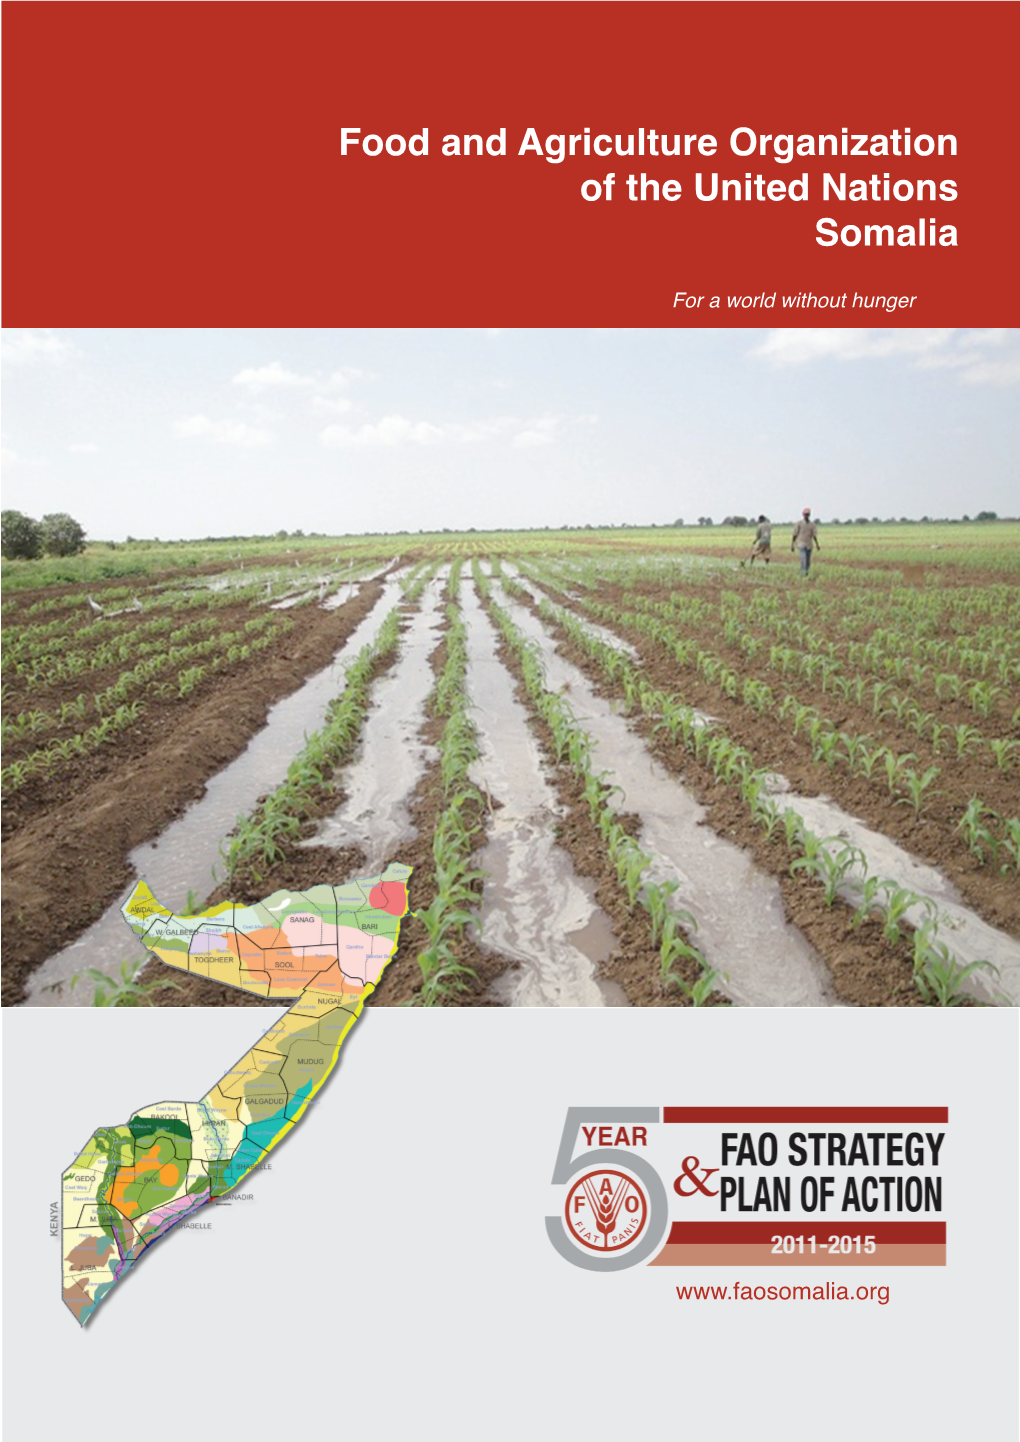 Food and Agriculture Organization of the United Nations Somalia